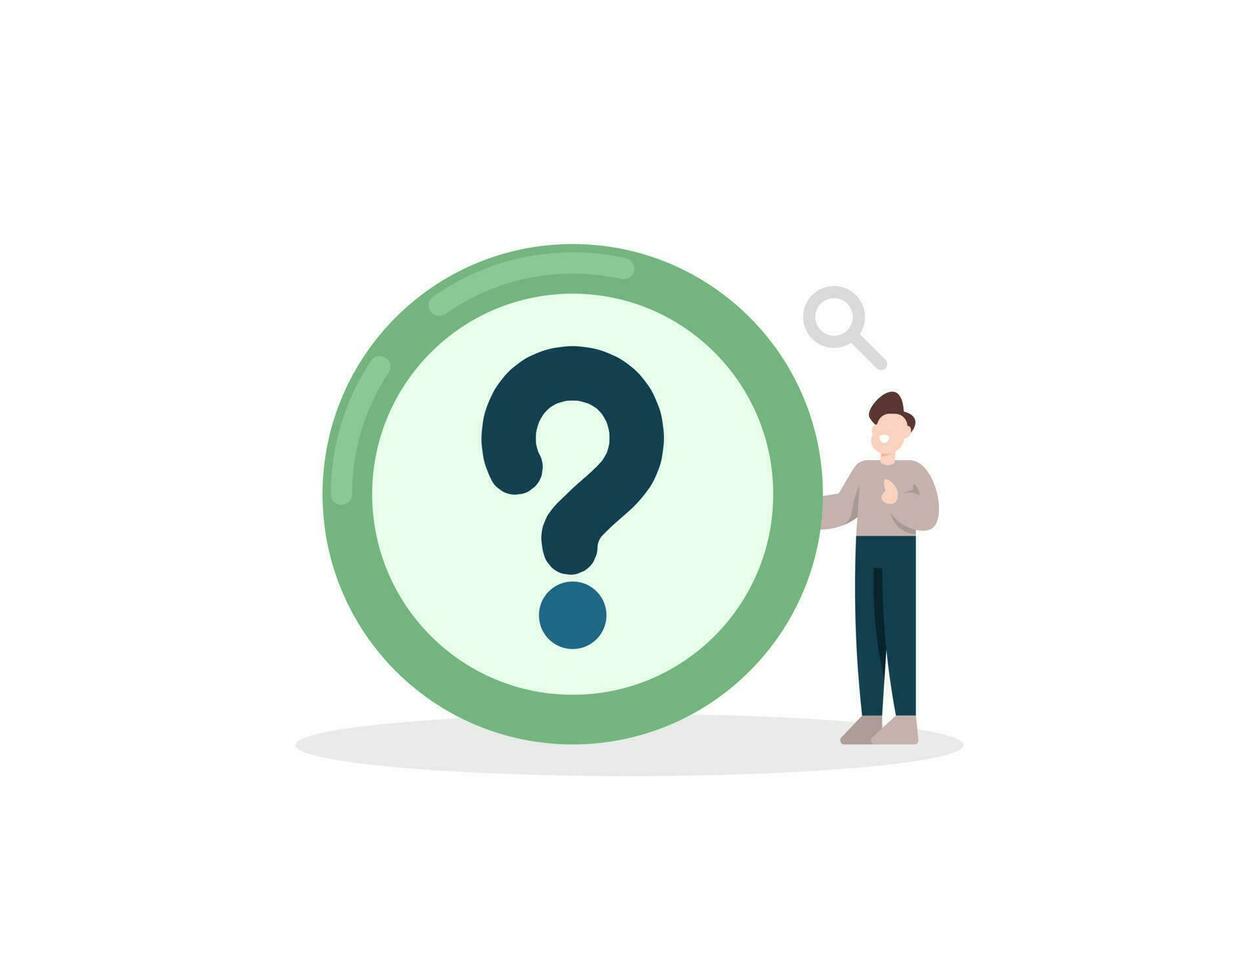 help center. FAQs or frequently asked questions. questions and answers or QnA. men wonder and confusion. customer or user assistance. question mark symbol. illustration concept design. vector elements